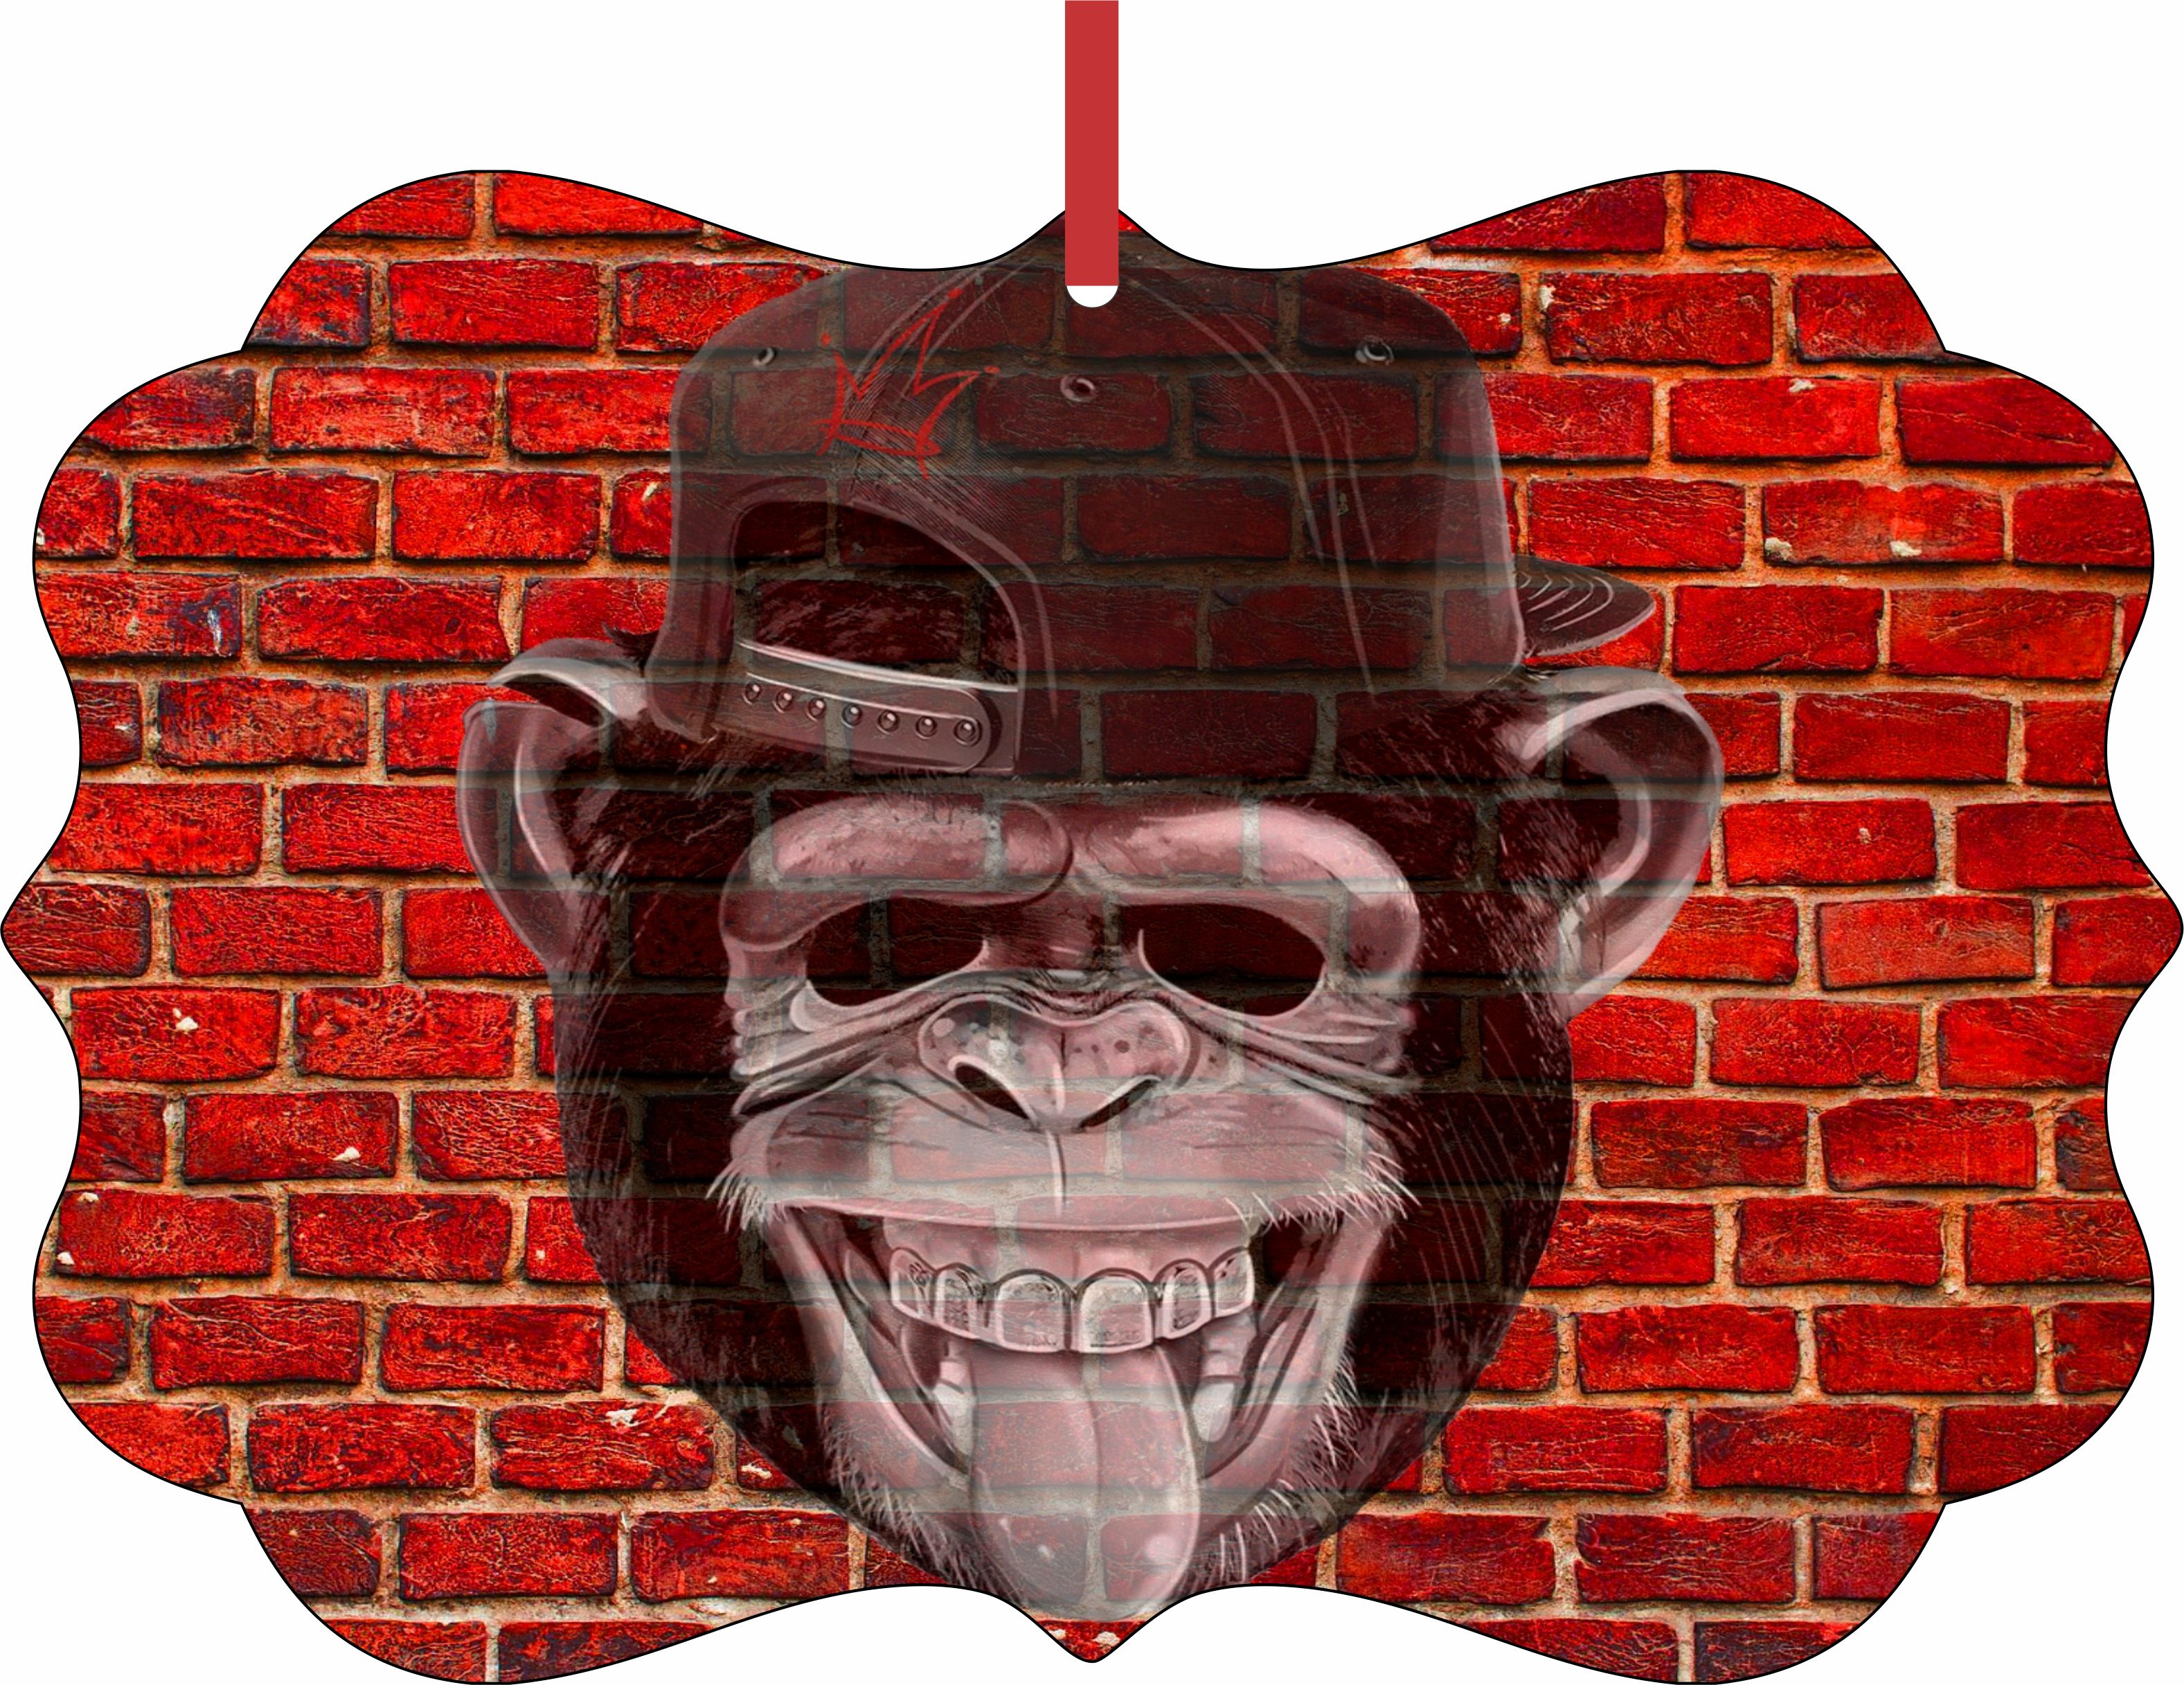 Punk Monkey Brick Wall Street Art Style Print Christmas Aluminum SemiGloss Quality Aluminum Benelux Shaped Hanging Christmas Holiday Tree Ornament Made in the U.S.A. - image 1 of 1